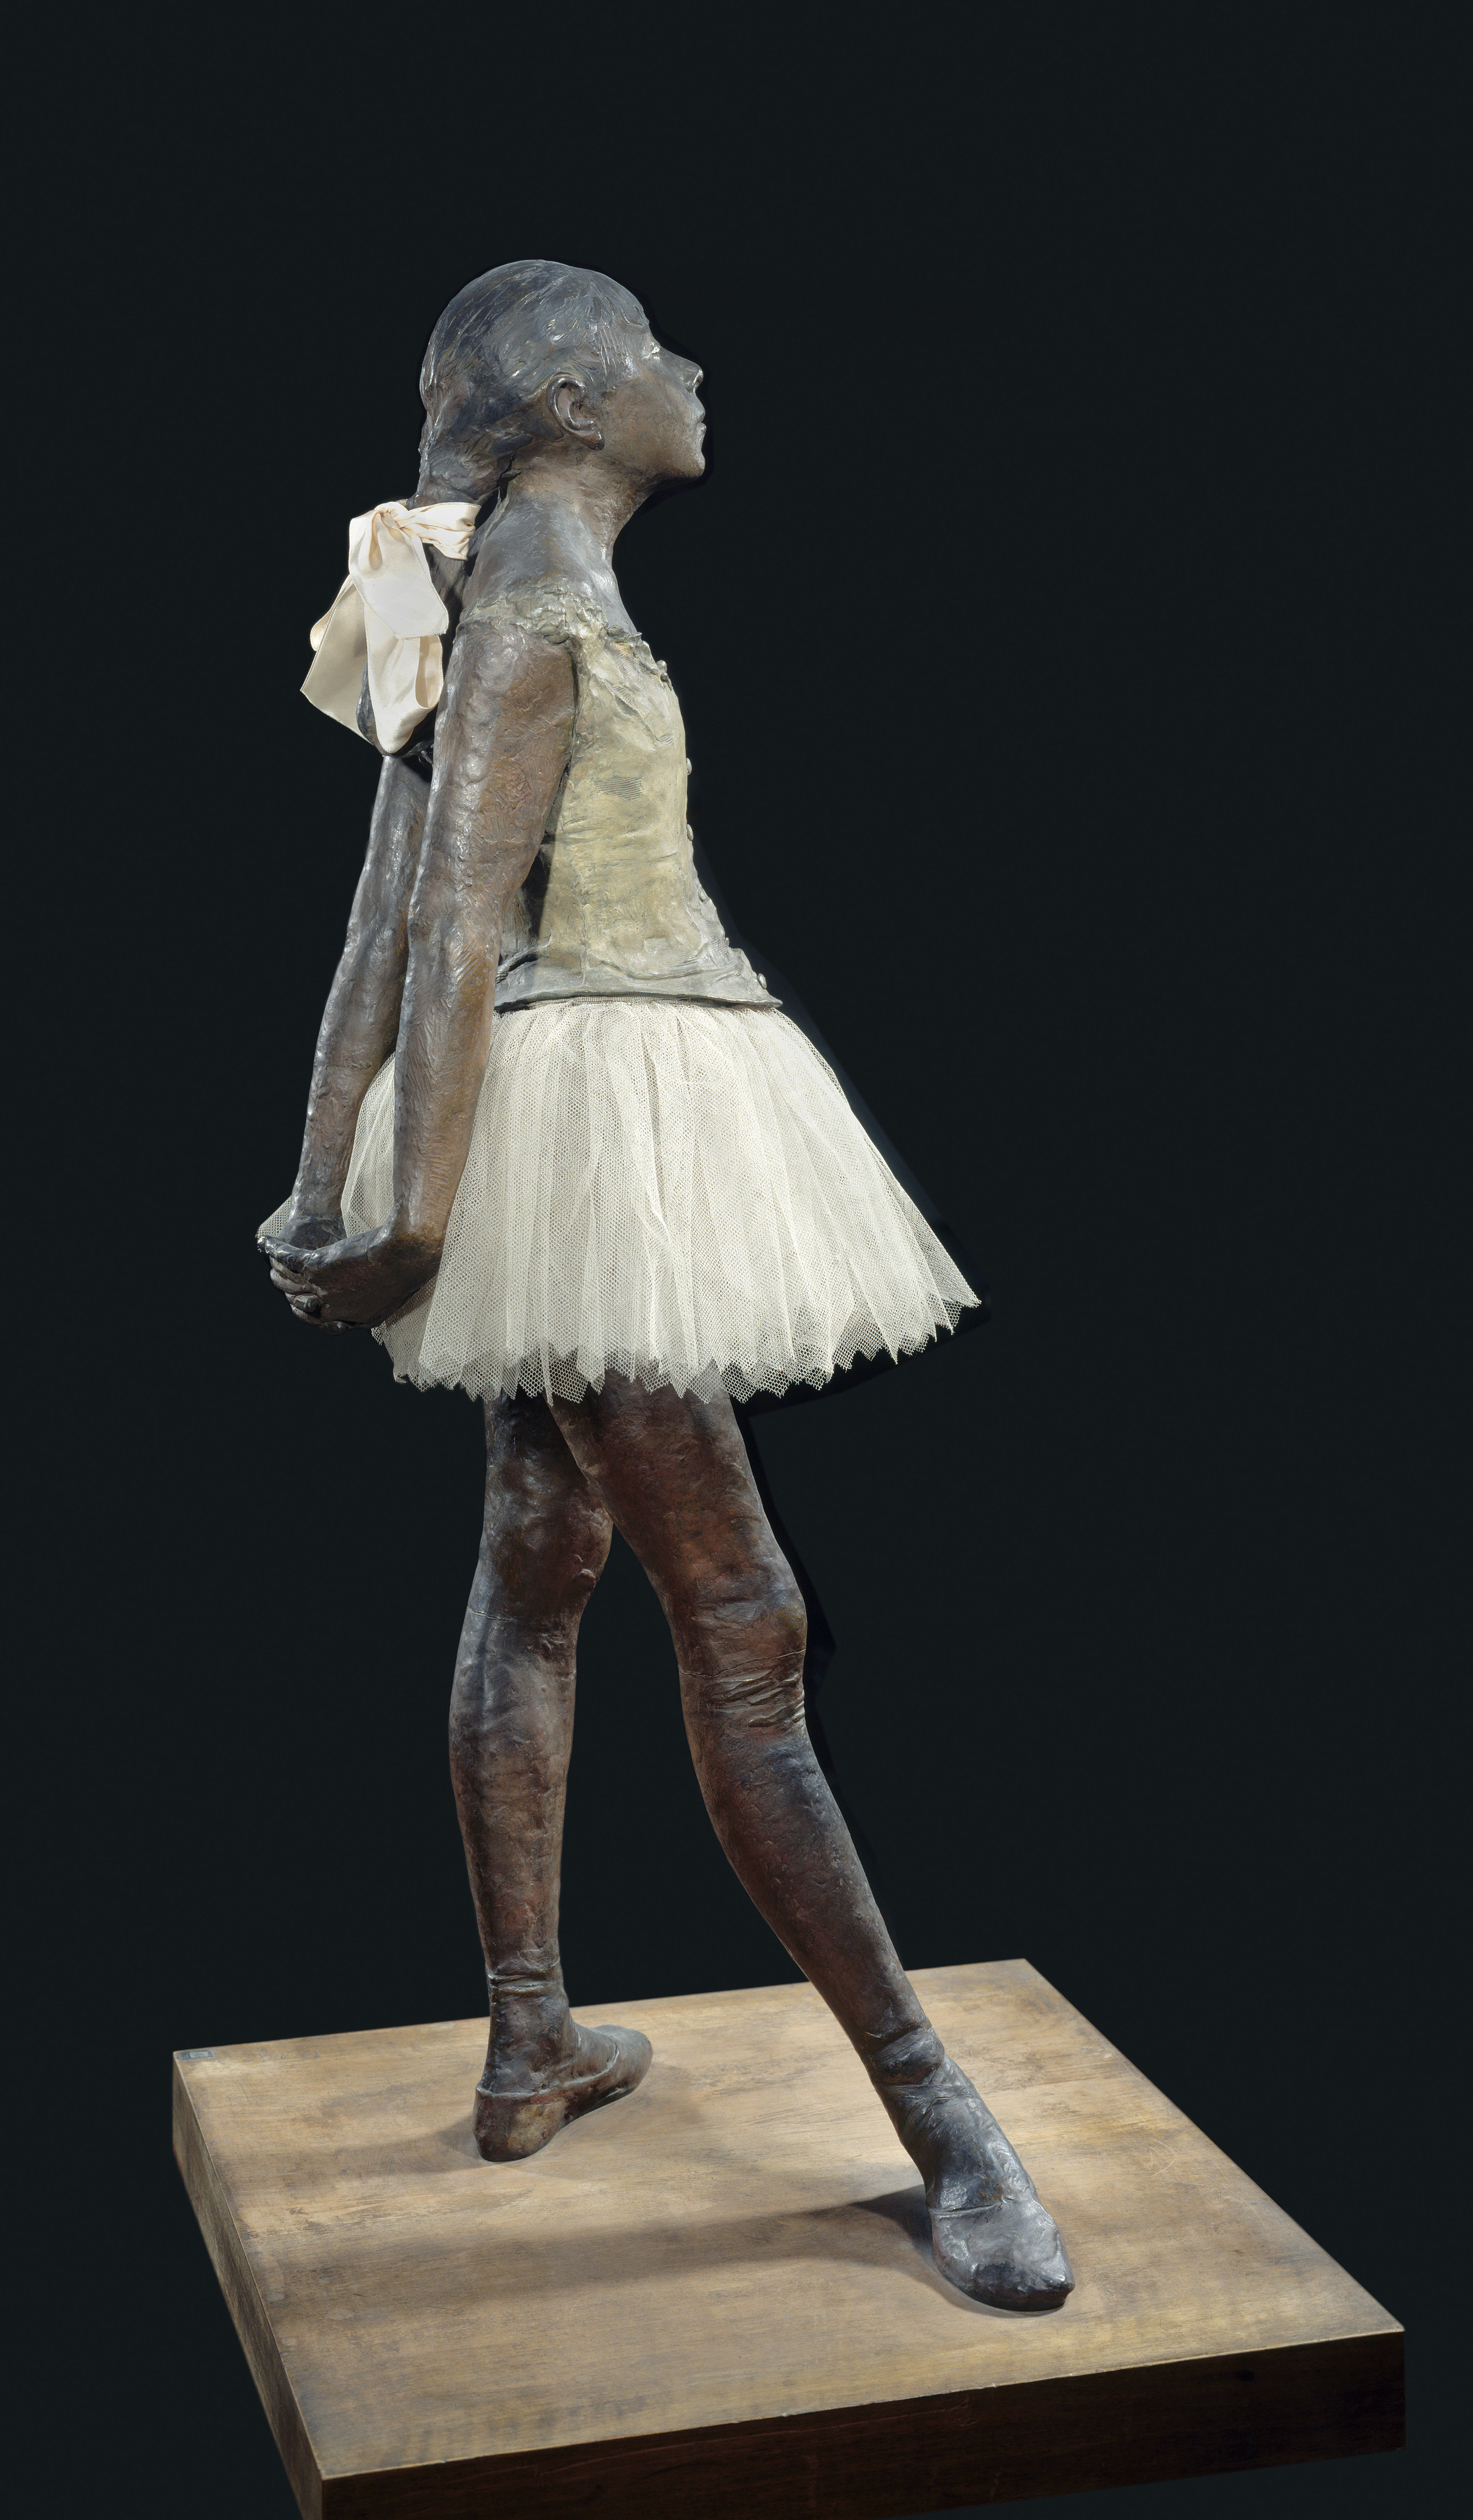 The Story Behind Degas Little Dancer Is Disturbing, But Not In The Way You Expect HuffPost Entertainment